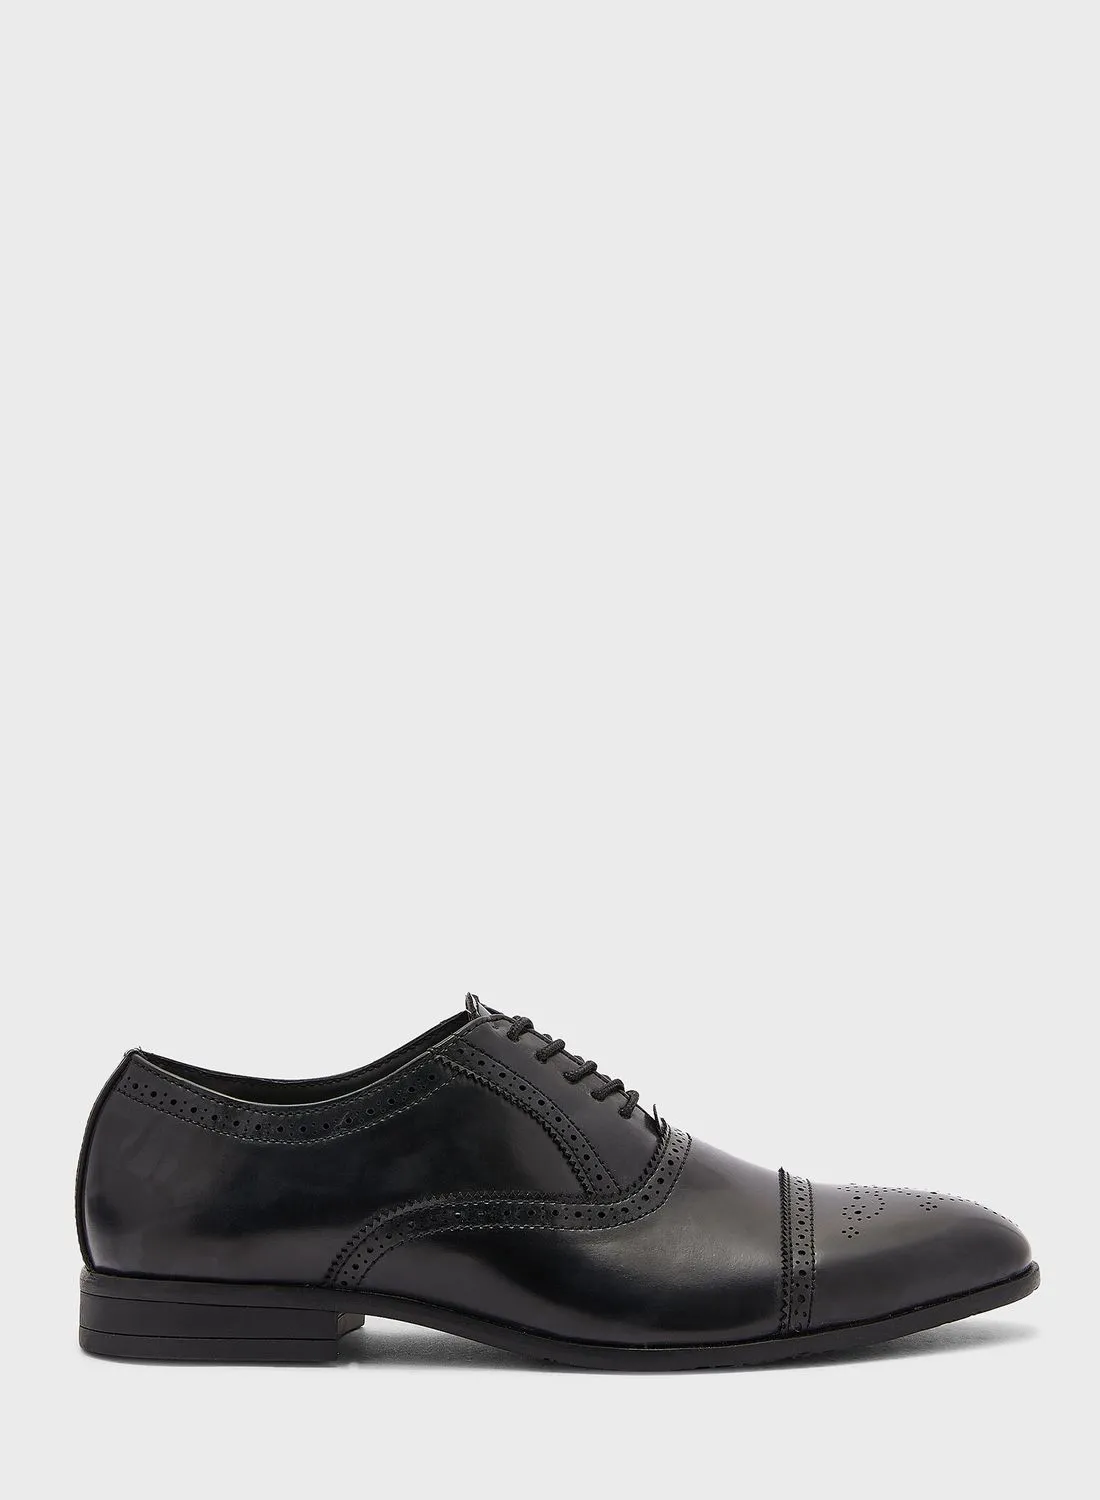 Robert Wood Faux Leather Brogue Oxford Formal Lace Ups